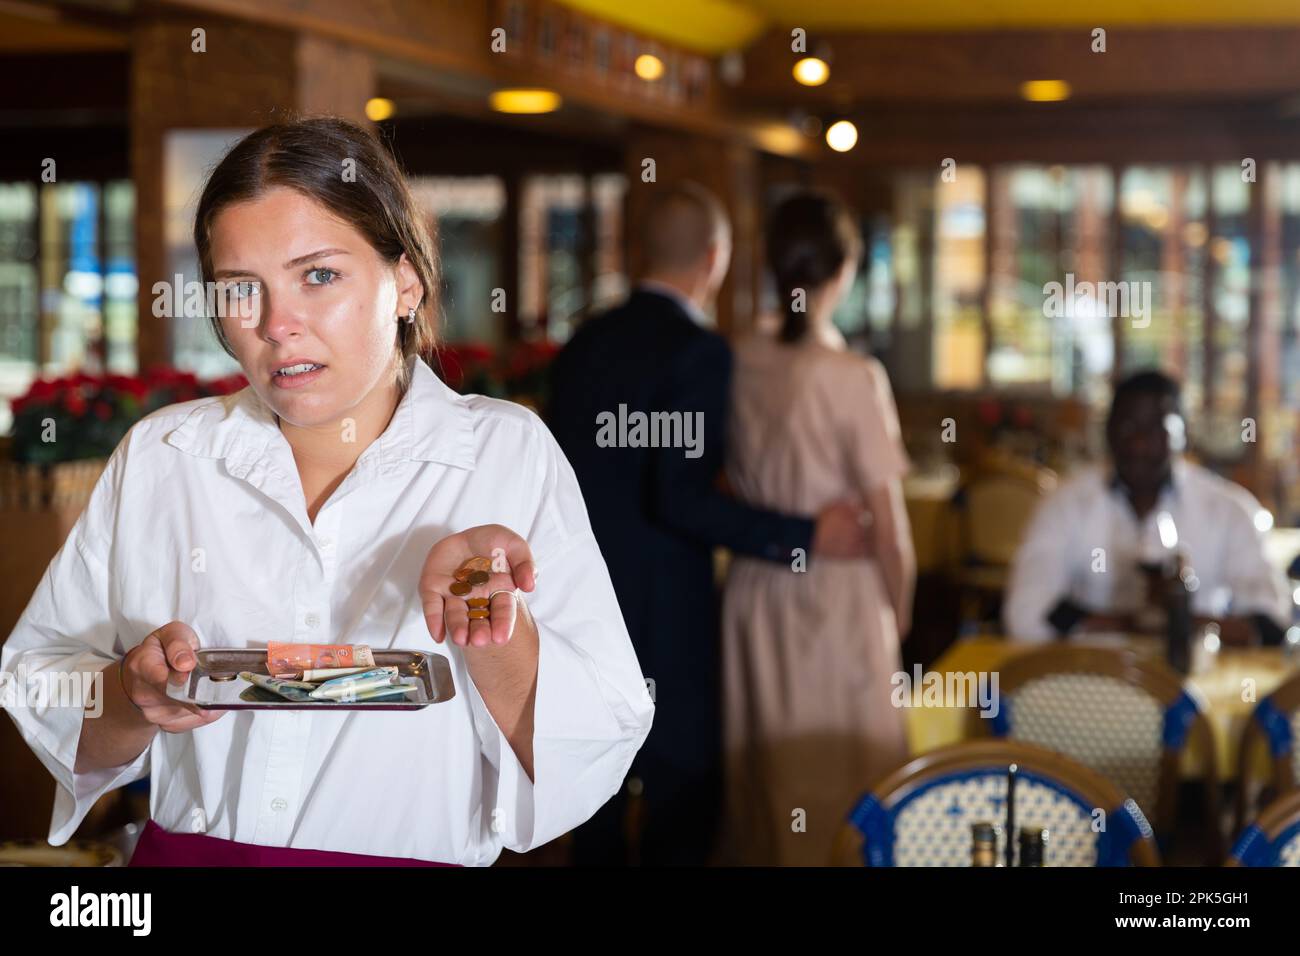 Woman waiter demonstrating her upset with small tip Stock Photo